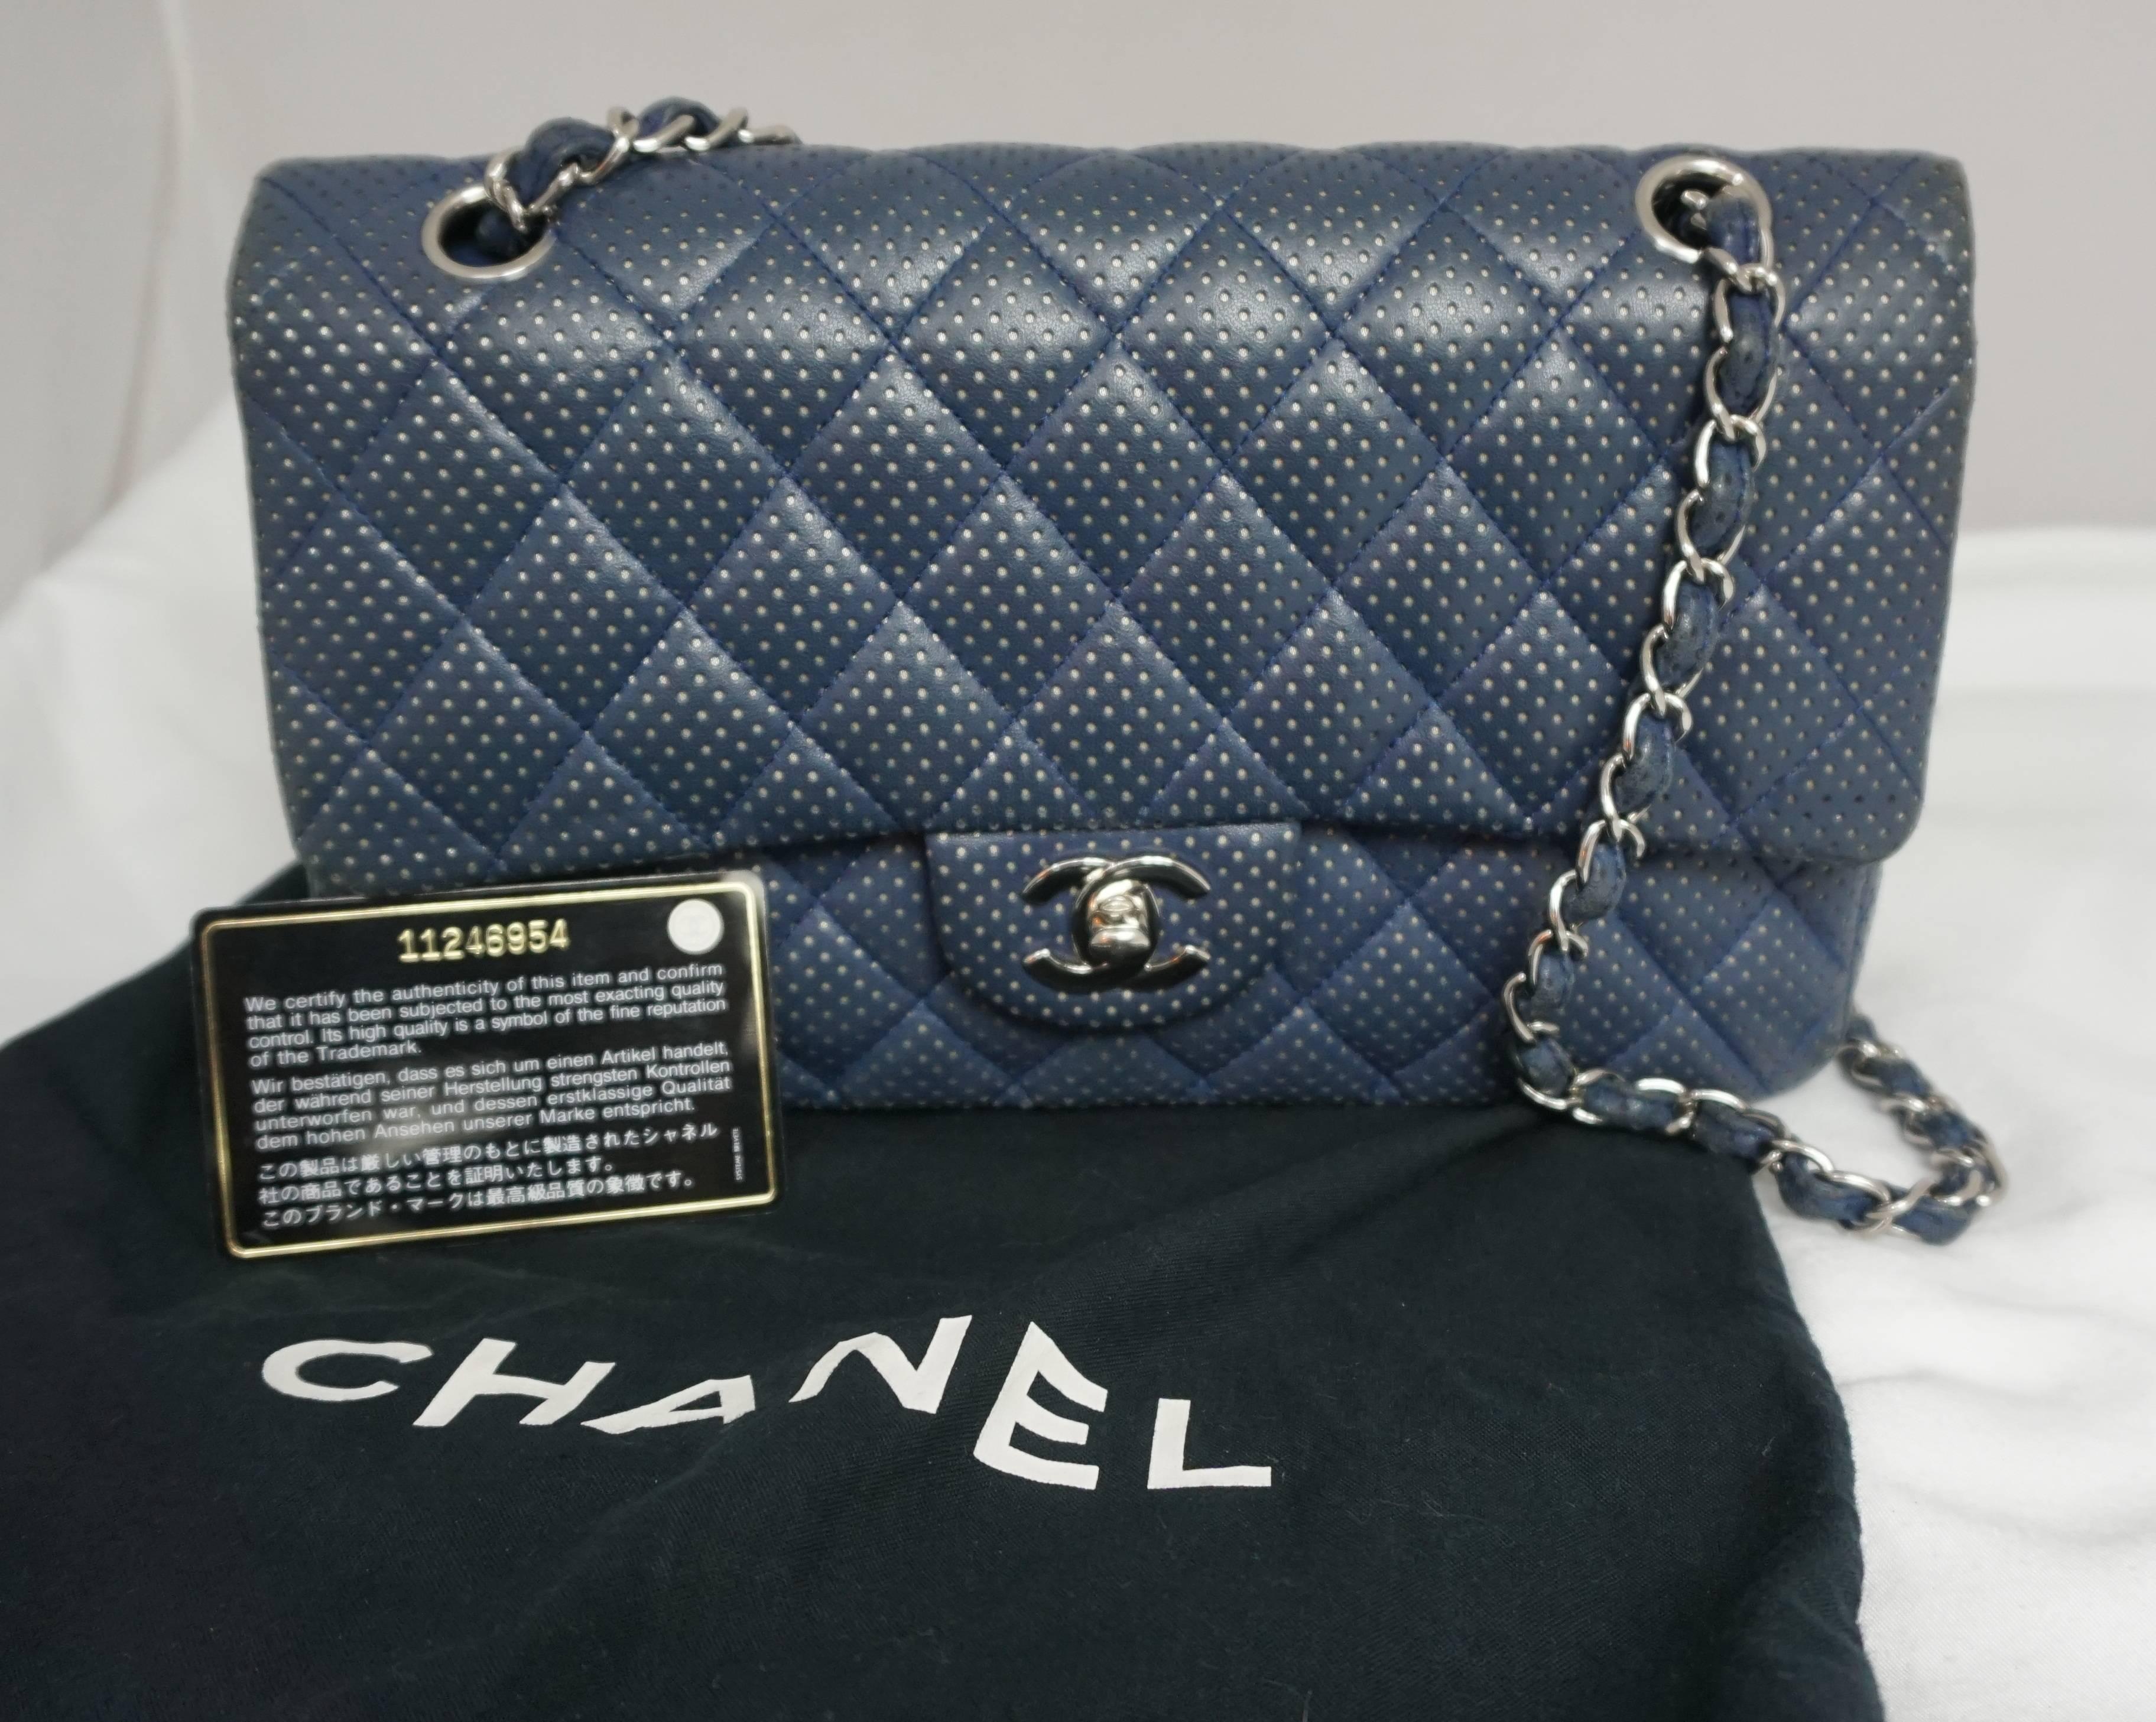 Chanel Blue/Silver Perforated Leather Medium Double Flap Handbag-SHW-2006 3